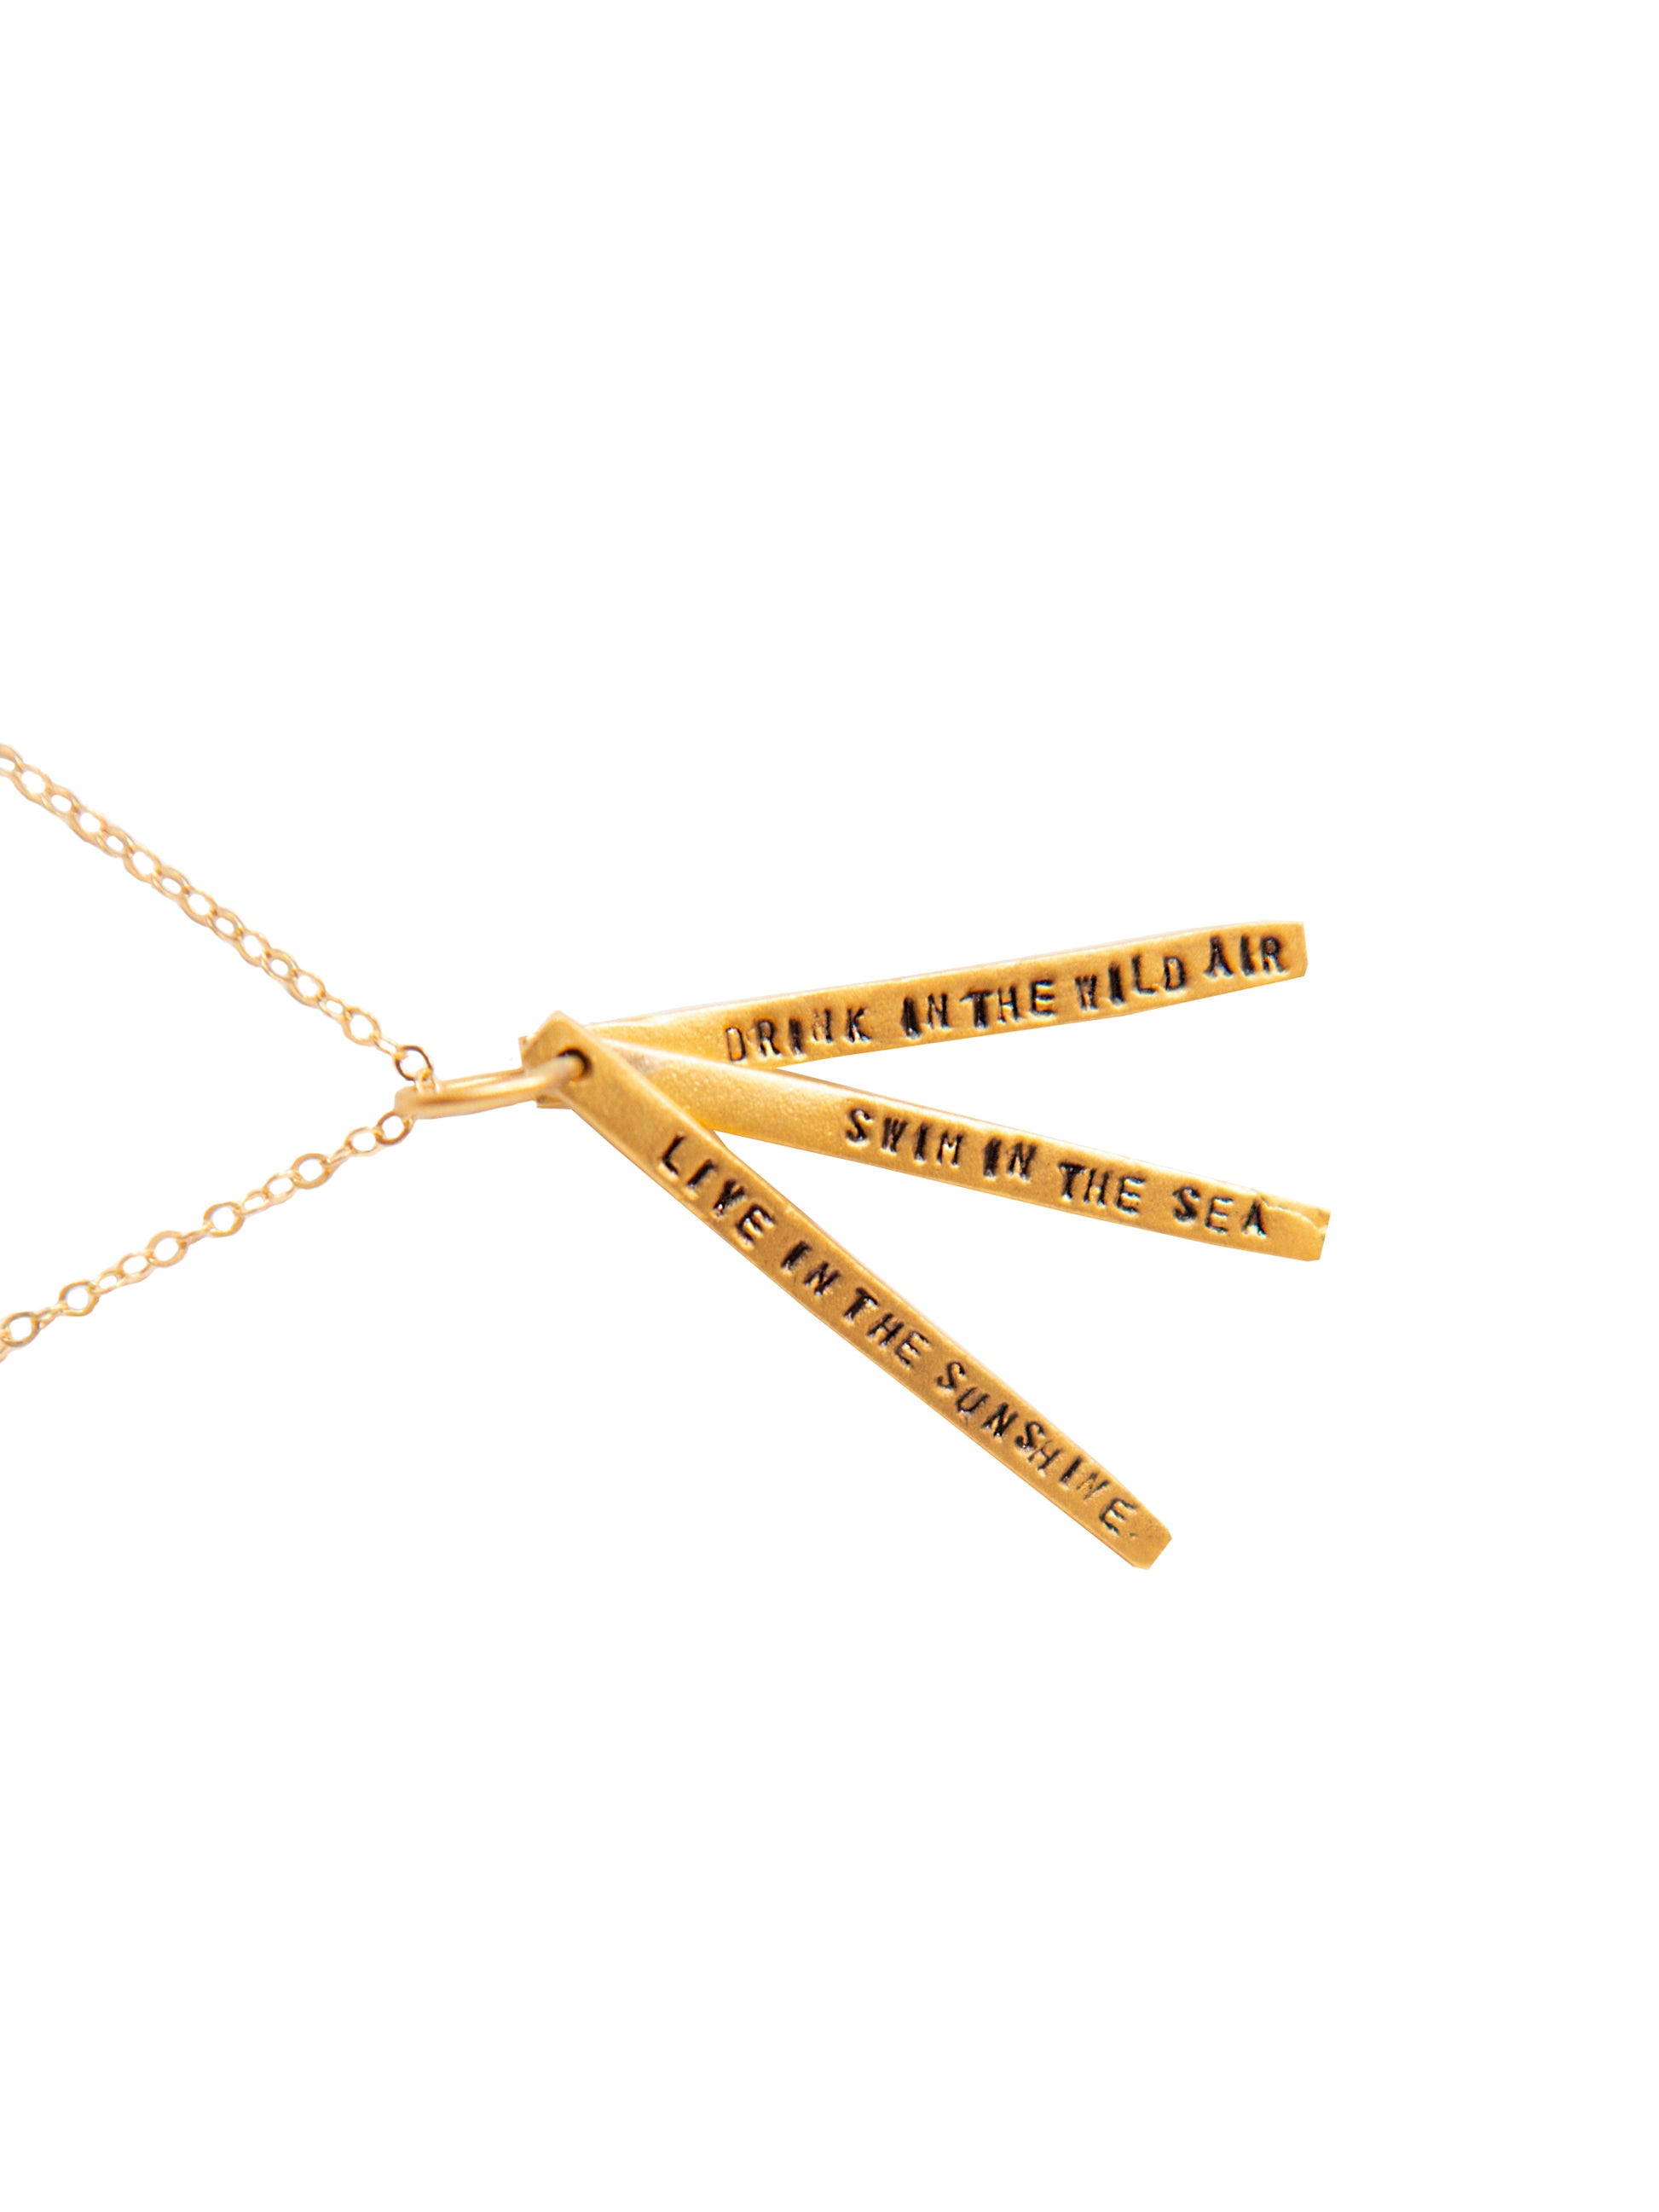 Chocolate & Steel Long-Bar Quote Necklace Ralph Waldo Emerson Gold Weston Table